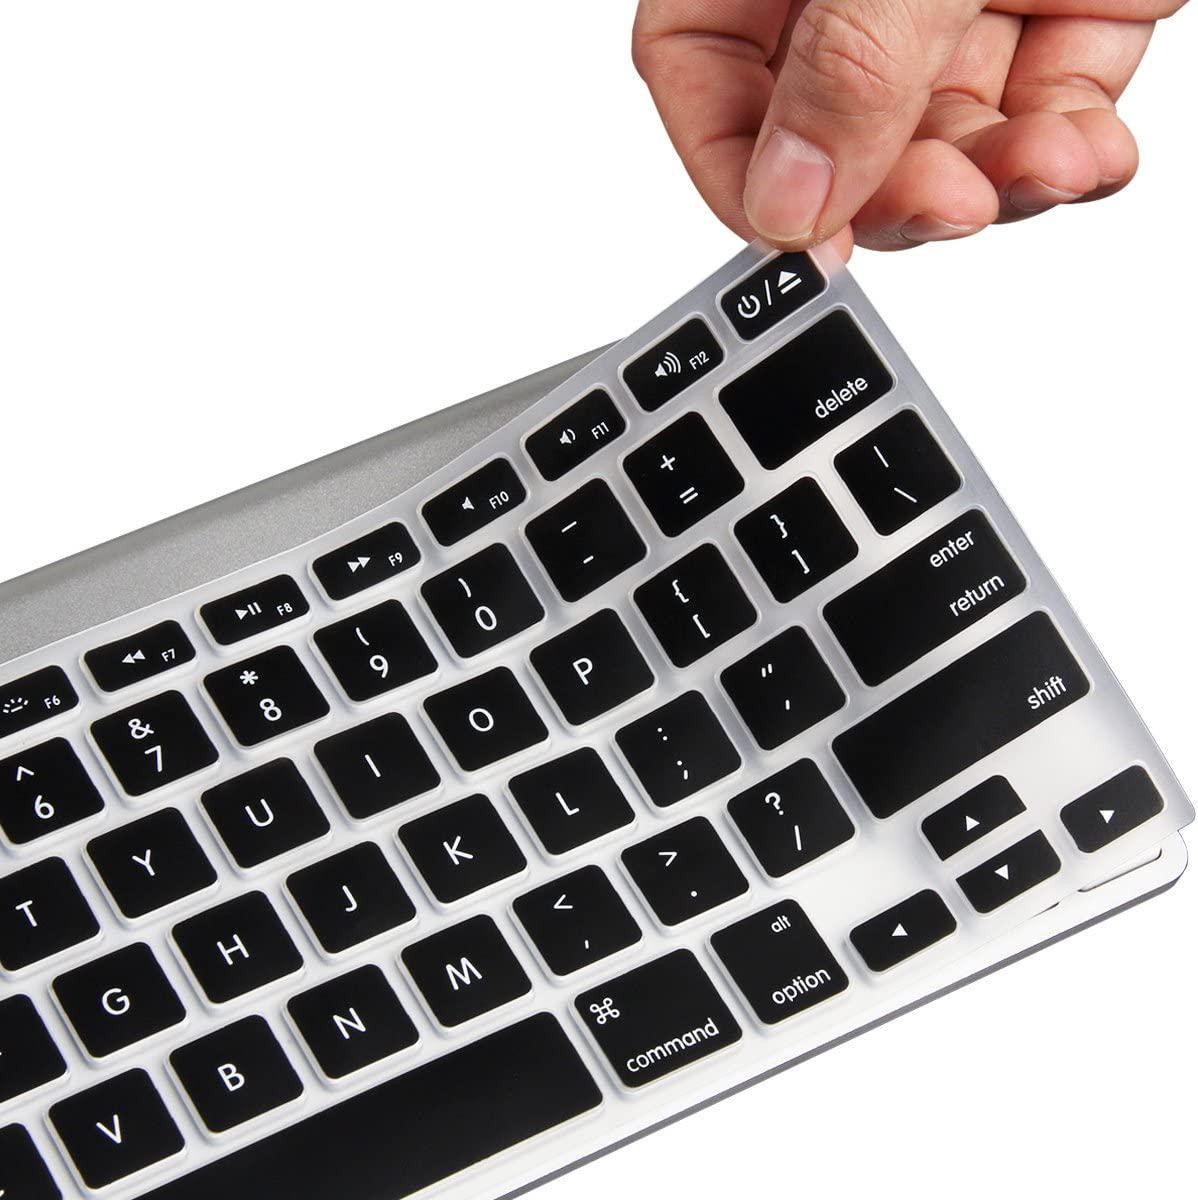 LENTION, LENTION Silicone Keyboard Cover Skin Compatible for 2009-2017 MacBook Air 13, Model A1369/A1466, MacBook Pro 13/15 (with/Out Retina Display, 2015 or Older Versions) - US Edition, ANSI, Black